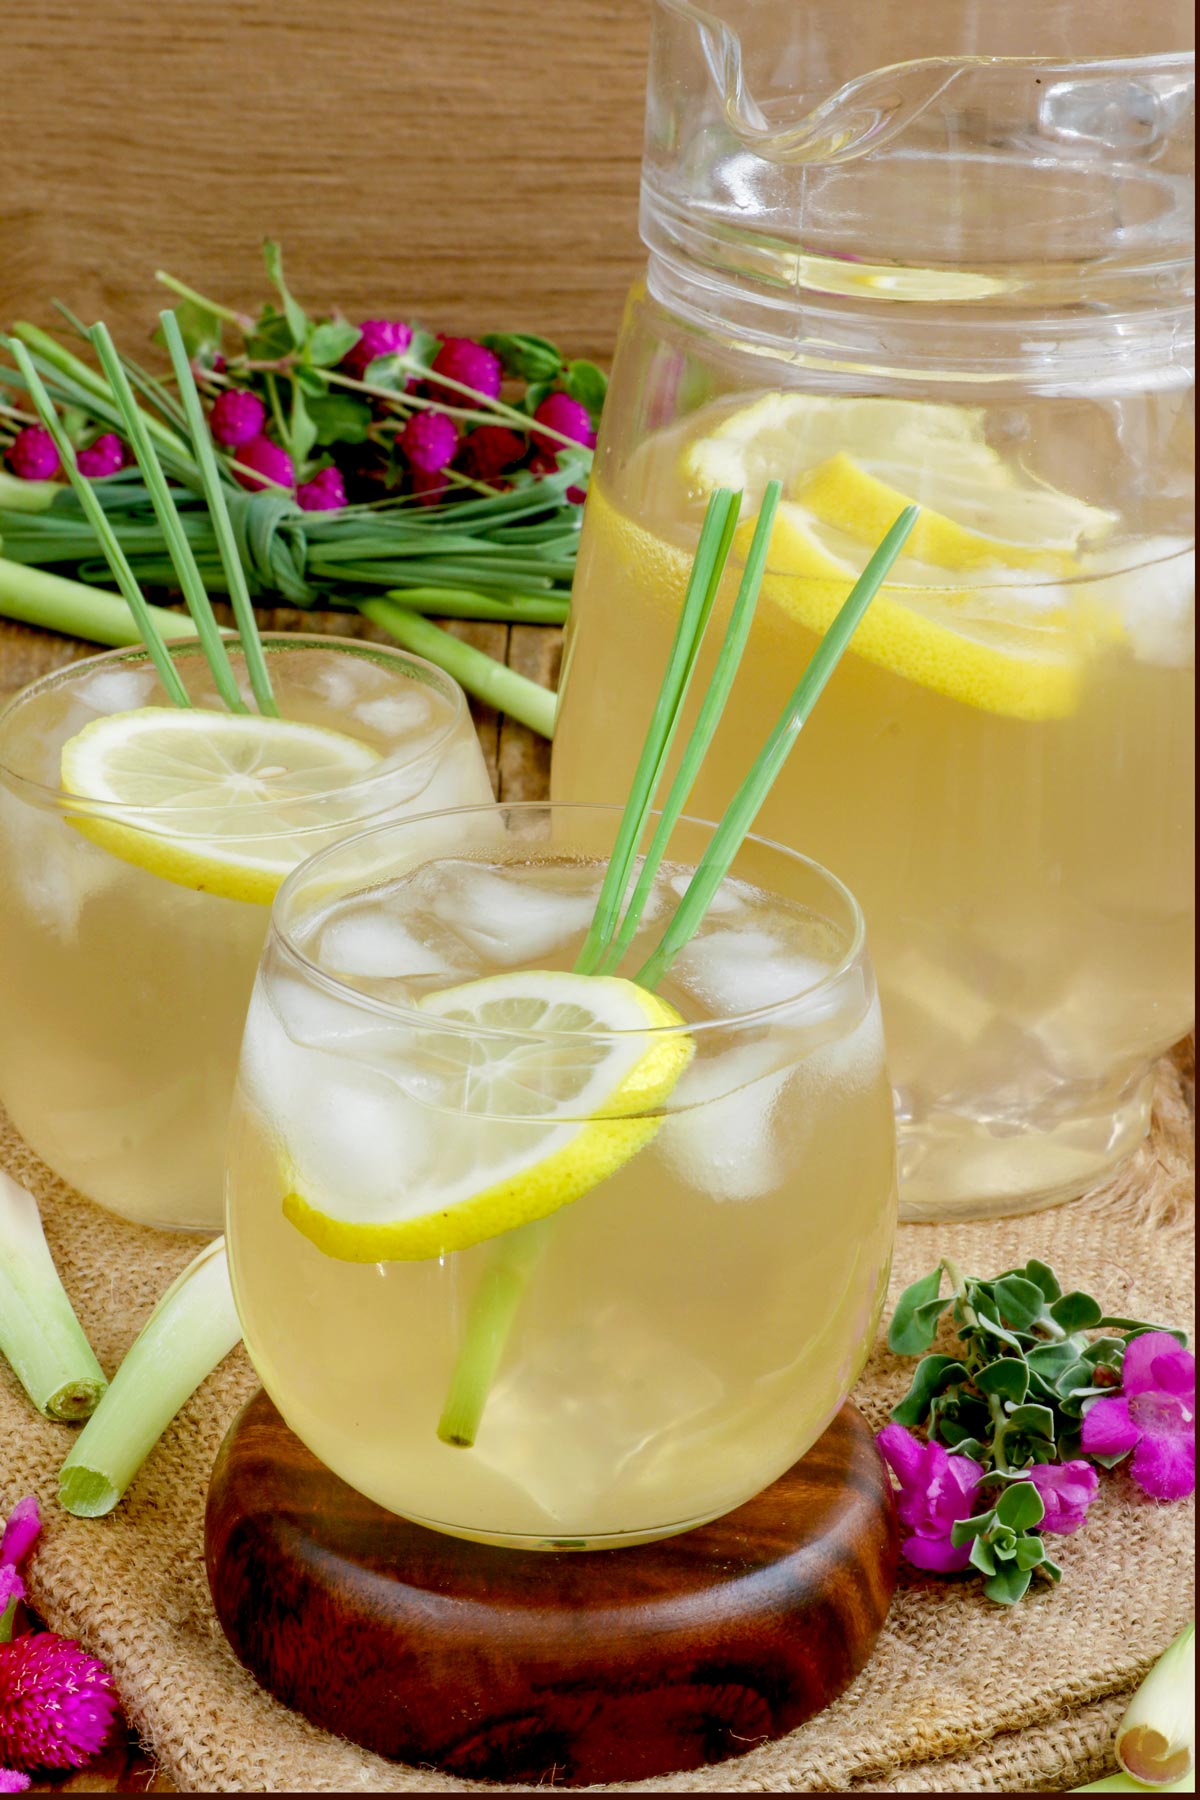 Ice cold drink in glasses with sliced lemon and lemongrass.